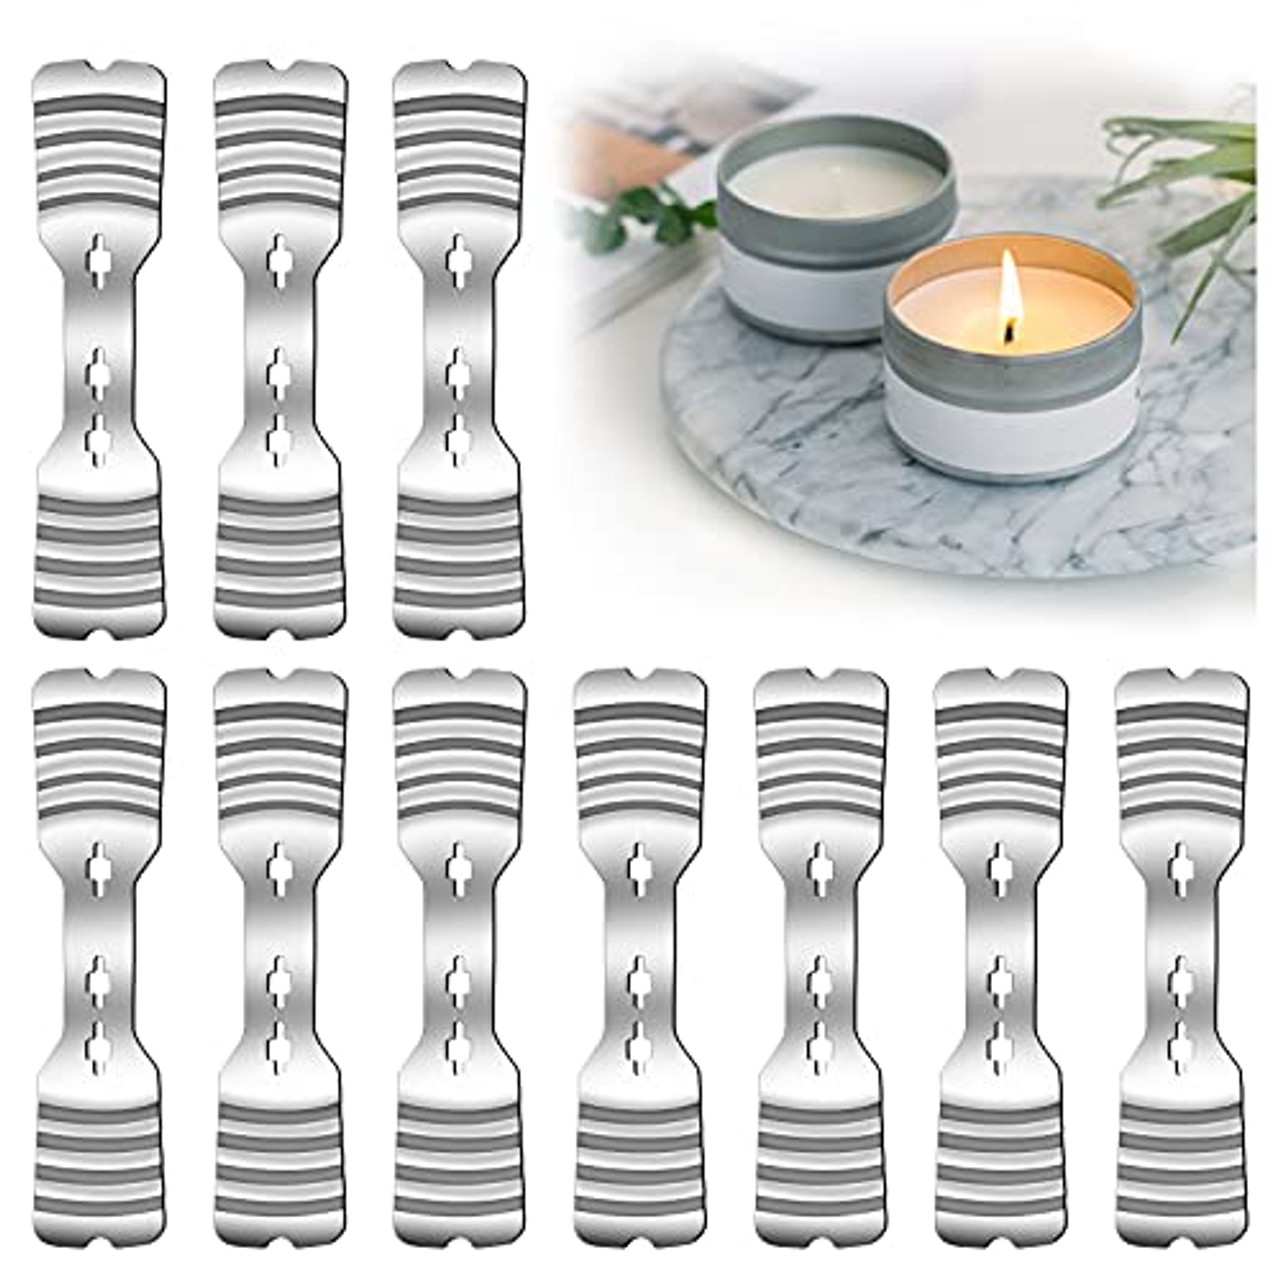 PandaHall Elite 40pcs Metal Candle Wick Holders 4 Inch Candle Wick Bars  Candle Wick Centering Device for Candle Making and DIY Crafts 